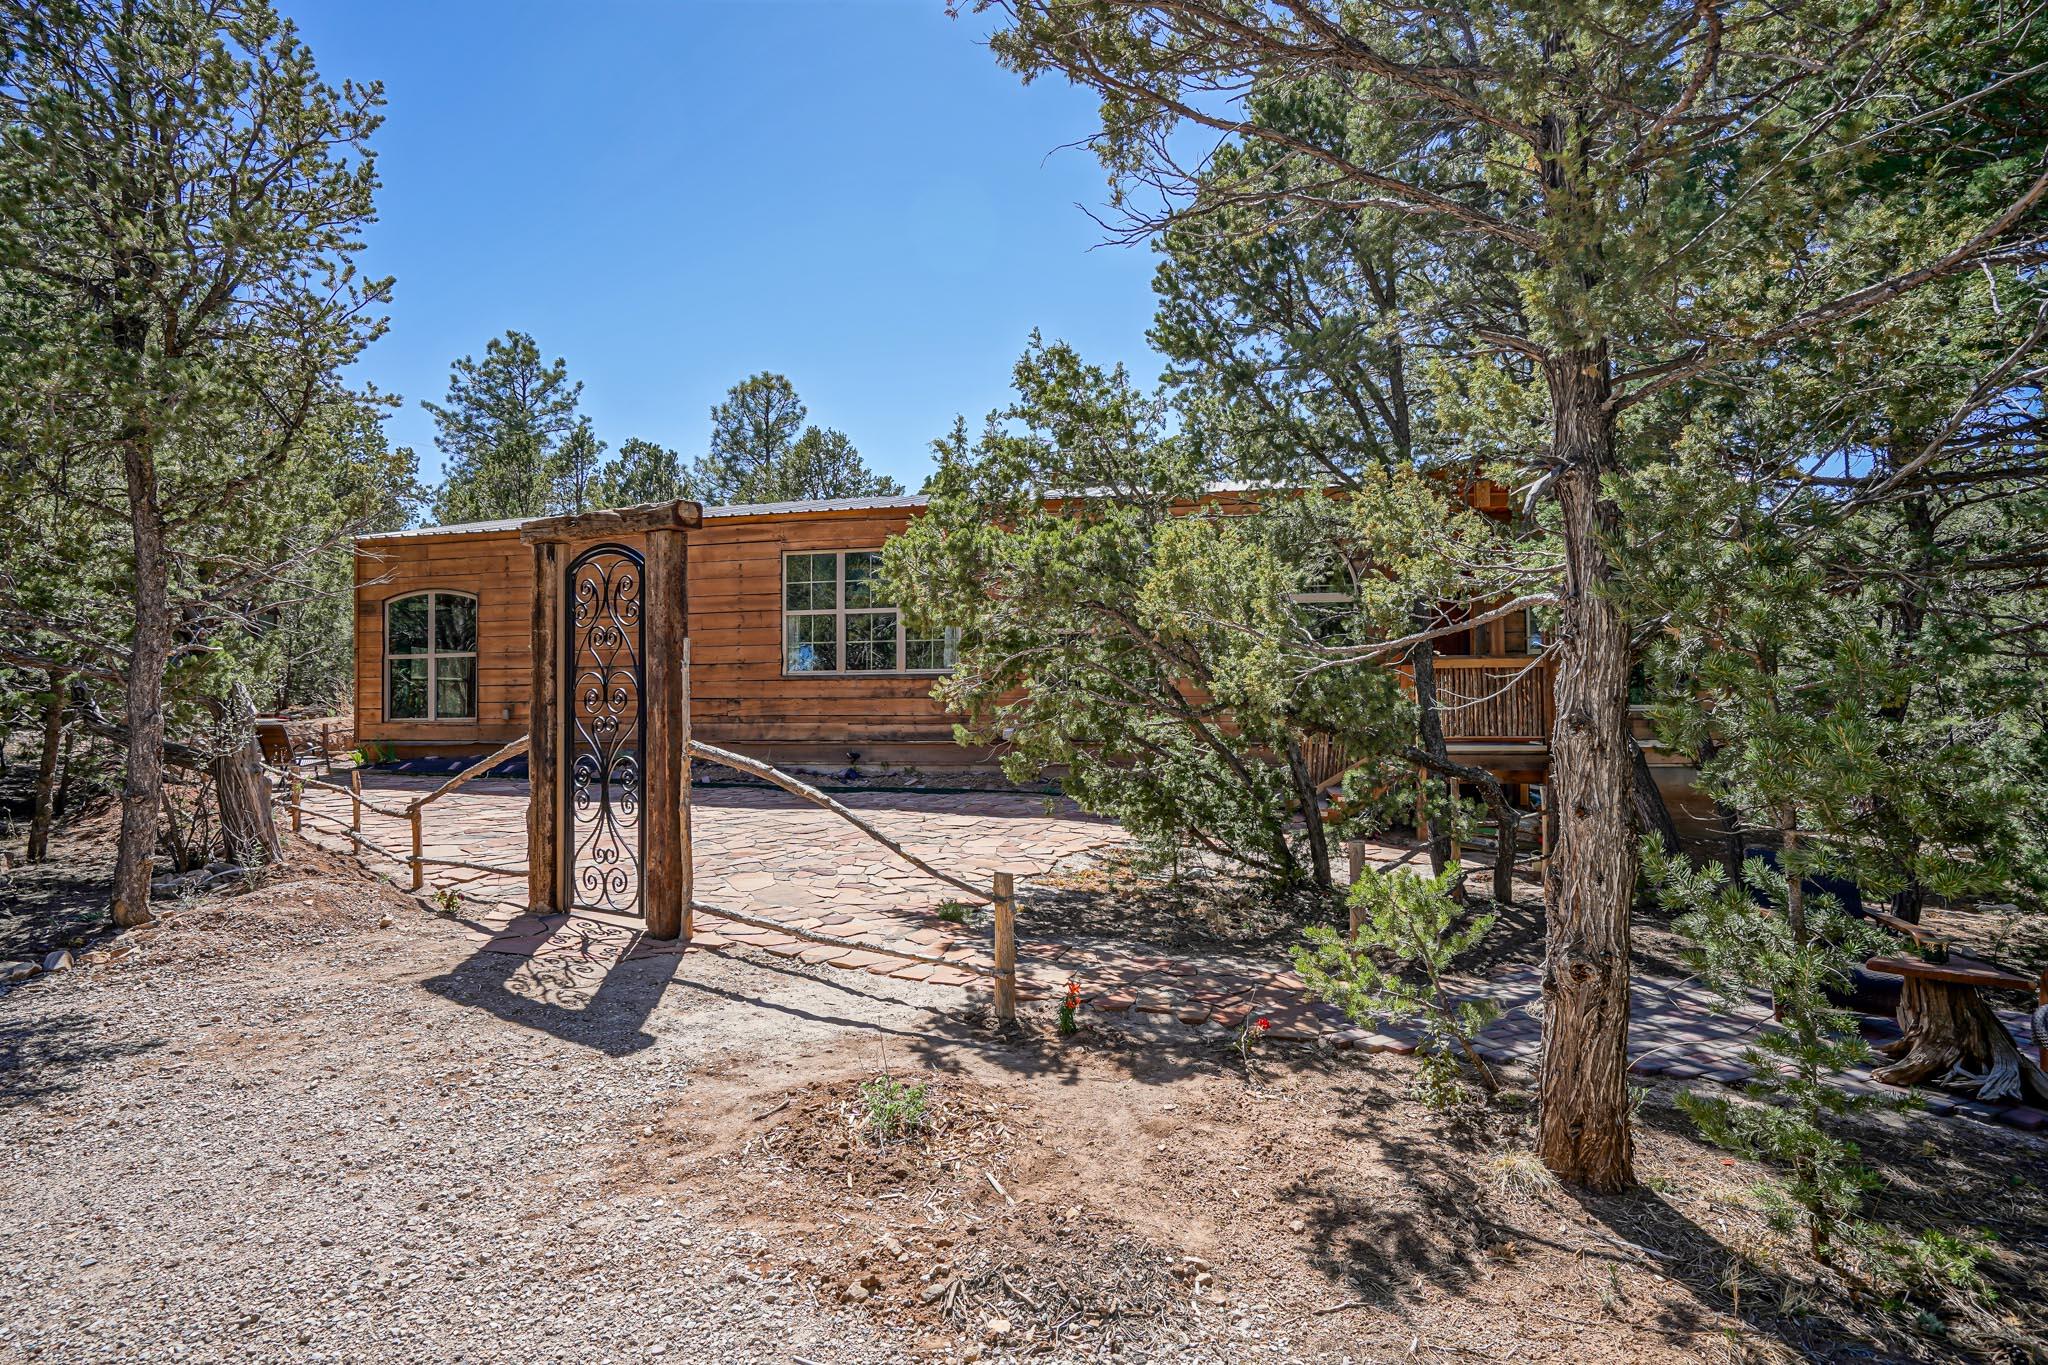 Escape the hustle & bustle to this beautiful 3 bed, 2 bath mountain home on 1-acre wooded lot full of rustic charm and unique features in a quiet Tijeras neighborhood. Large picture windows bring the outside in, variegated brick flooring throughout, wood ceilings, & latilla wood accents. Vintage ceiling fans from the Santa Fe Train Depot circulate REFRIGERATED AIR throughout the large living and dining areas. The home looks and feels like a cabin but was built to last with high end insulation to keep you comfortable & reduce utility bills. High speed internet and nearby cell tower keep you connected. Just a scenic 20-minute drive to ABQ & an hour to Santa Fe. Enjoy nearby skiing at the Sandia Crest & Santa Fe Ski Slopes. Fully furnished w/ many unique pieces! Would make a great BNB!